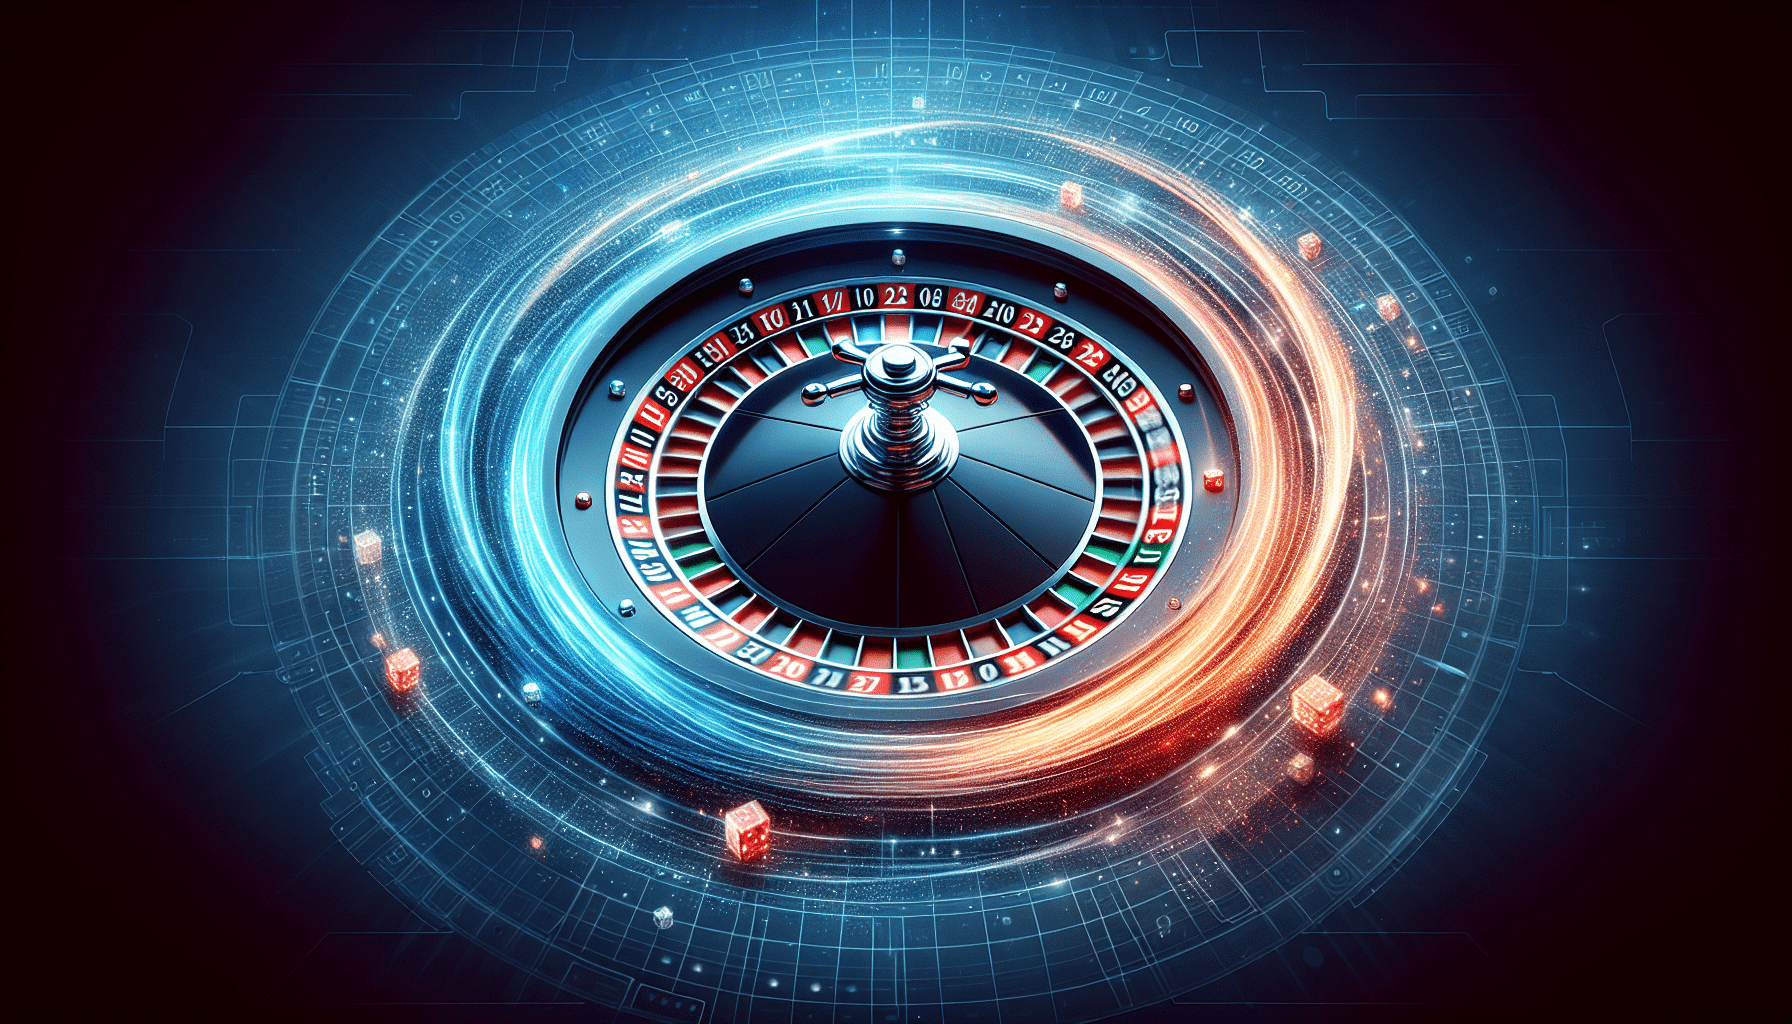 how to choose the right online casino for playing roulette